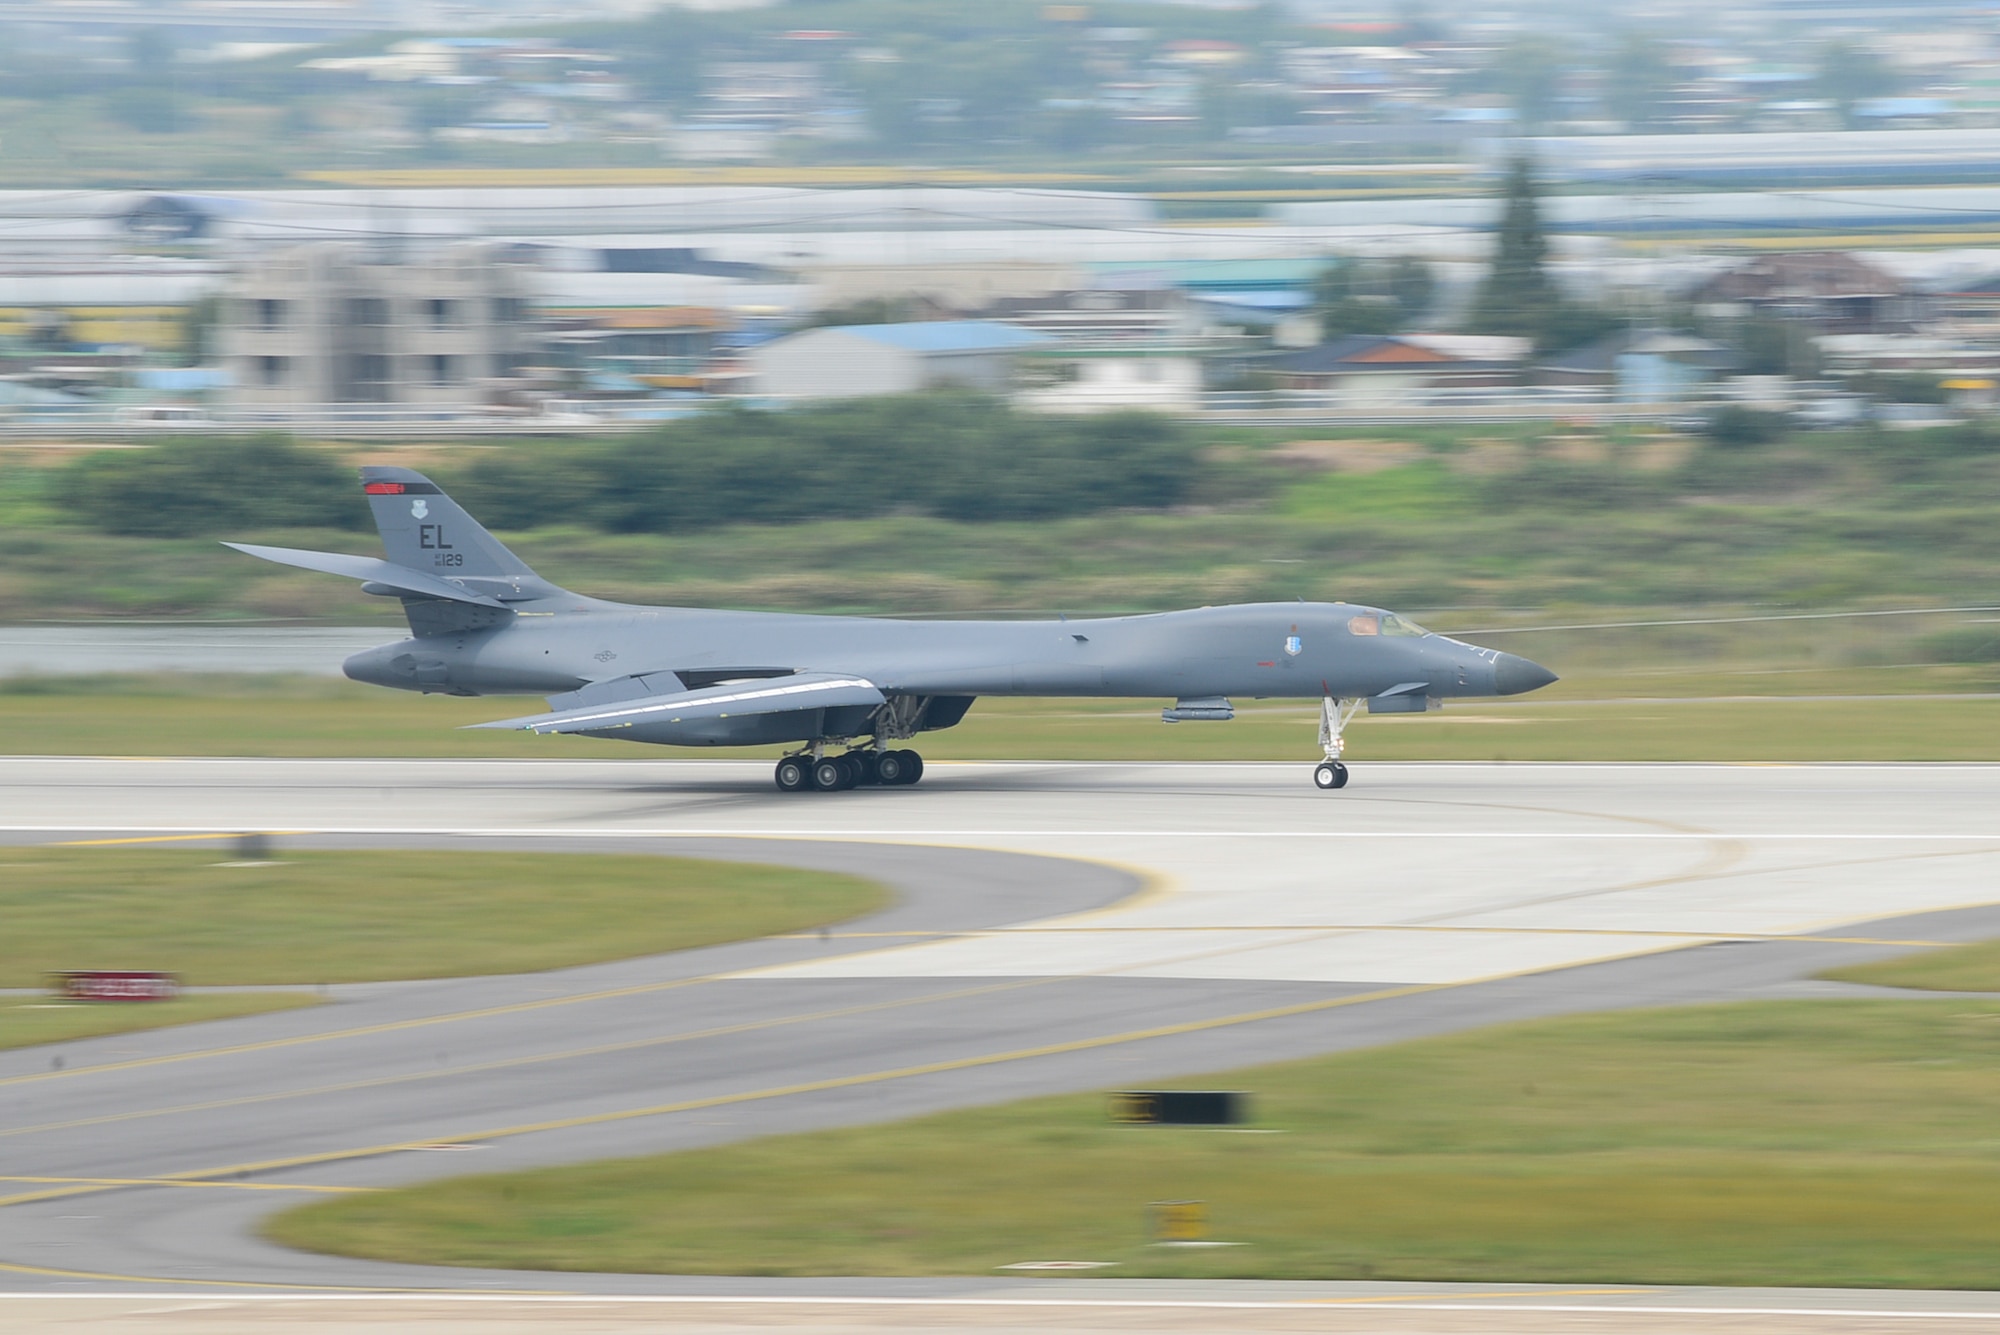 A U.S. Air Force B-1B Lancer assigned to Andersen Air Base, Guam, performs a landing at Osan Air Base, Republic of Korea. Sept. 21, 2016. The B-1 is the backbone of the U.S. long-range bomer mission and is capable of carrying the largest payload of both guided and unguided weapons in the Air Force Inventory. The flight was the closest a B-1 has ever flown to the border between the Republic of Korea and North Korea. (U.S. Air Force photo by Senior Airman Dillian Bamman)